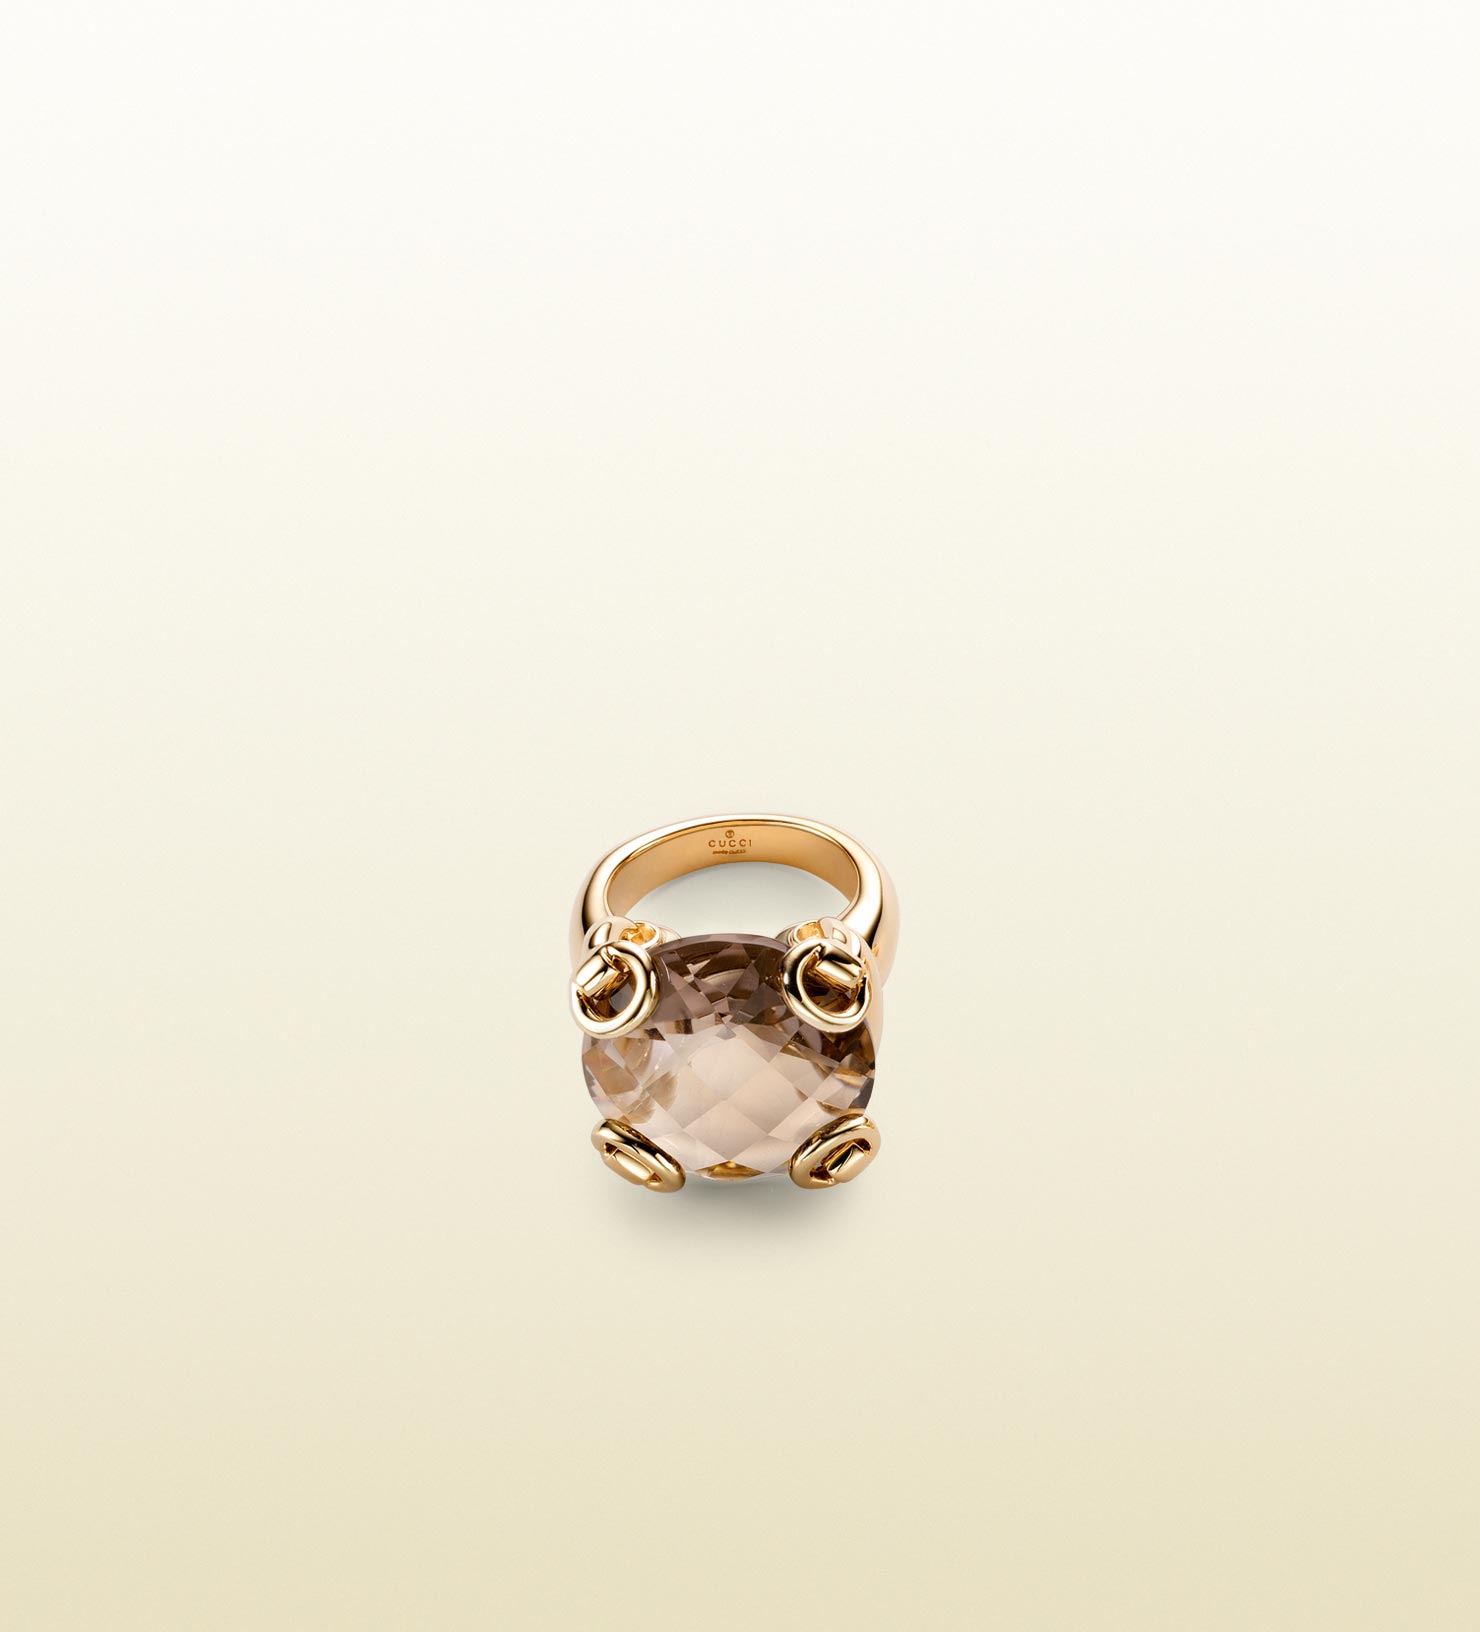 Gucci Horsebit Cocktail Ring in Yellow 